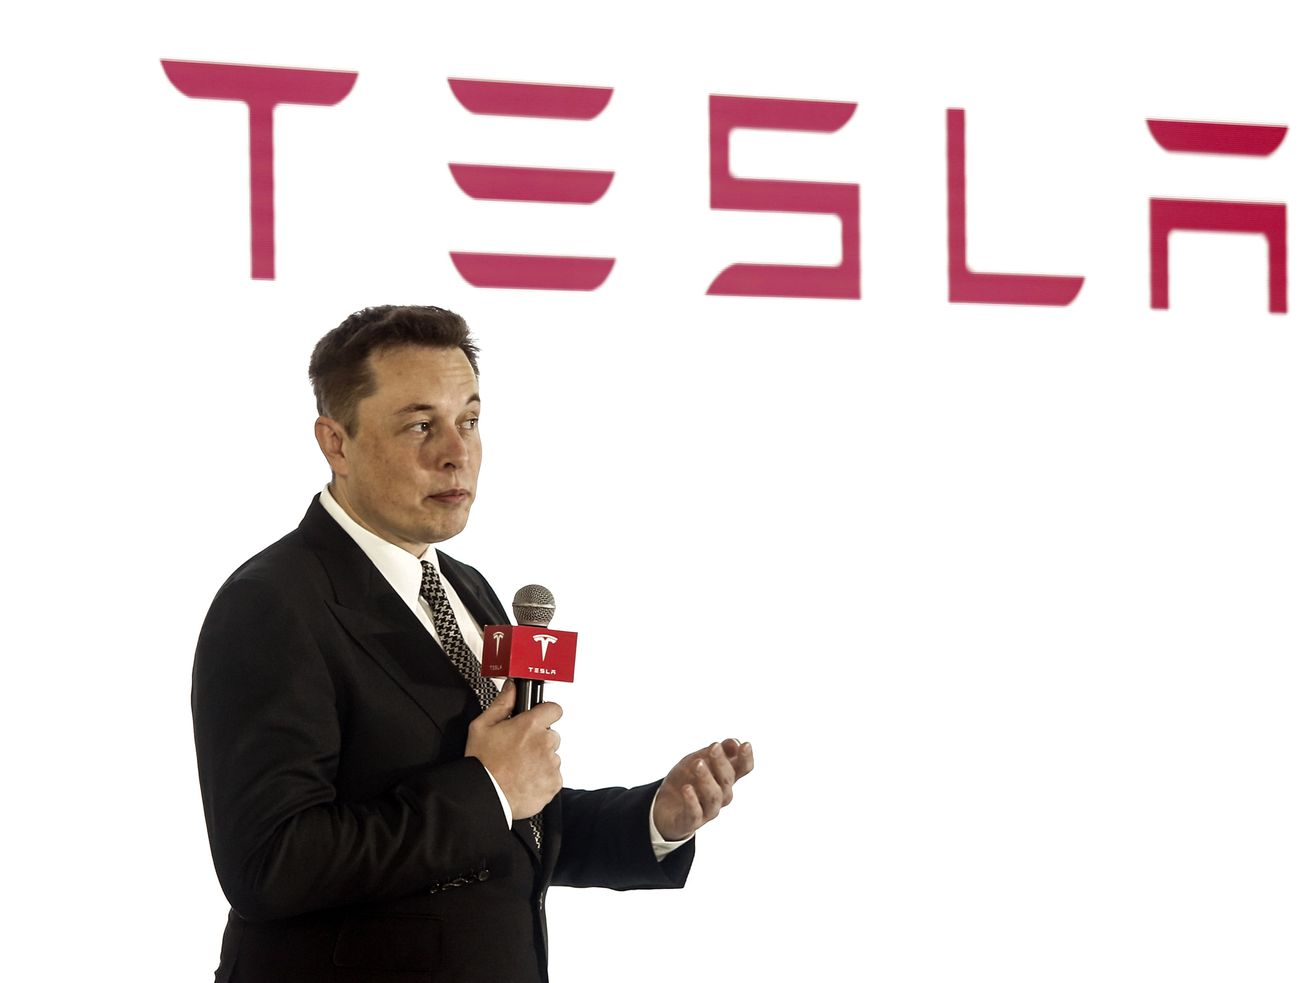 Elon Musk speaks into a handheld microphone, wearing a dark suit and tie and standing in front of a white backdrop with a large red Tesla logo. 